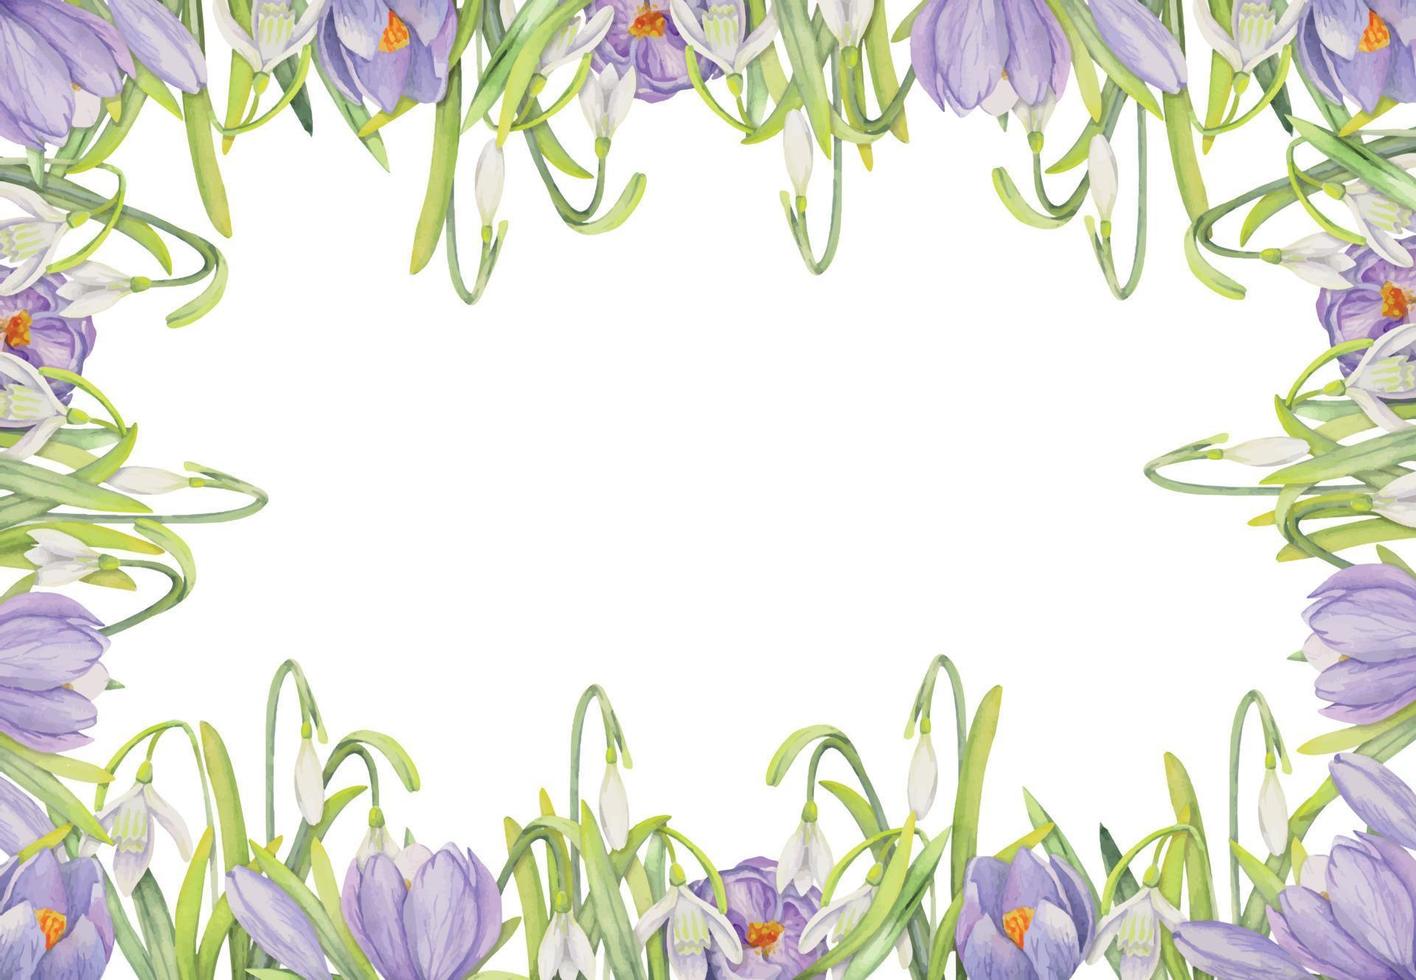 Watercolor hand drawn square frame with spring flowers, crocus, snowdrops, branches, leaves. Isolated on white background. Design for invitations, wedding, greeting cards, wallpaper, print, textile. vector